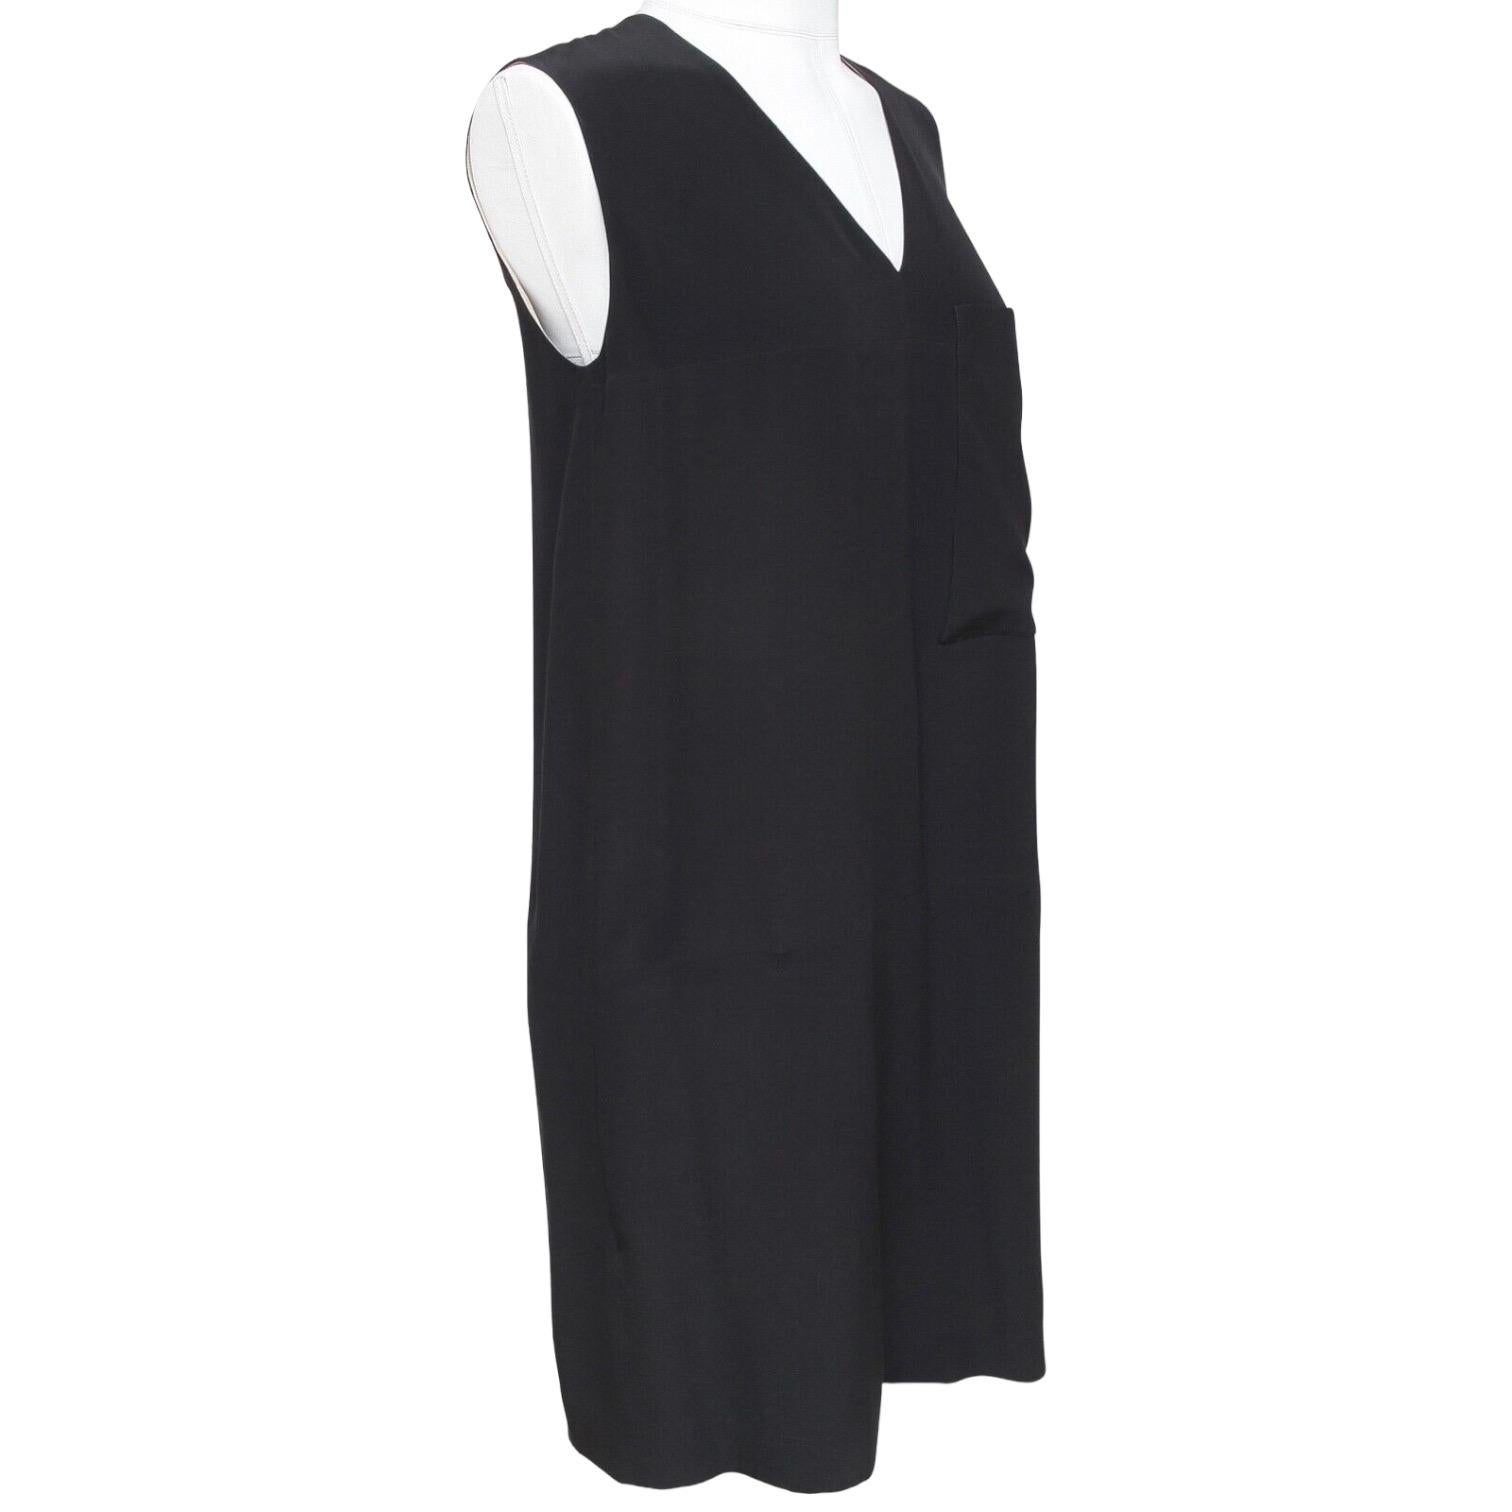 GUARANTEED AUTHENTIC CHLOE BLACK SLEEVELESS SILK DRESS

Design:
- Black silk sleeveless dress.
- V-neck.
- Patch pocket at chest.
- Pockets at hips.
- Rear has pleating.
- Beige color lining.

Size: 34

Material: 100% Silk; Lining 100%